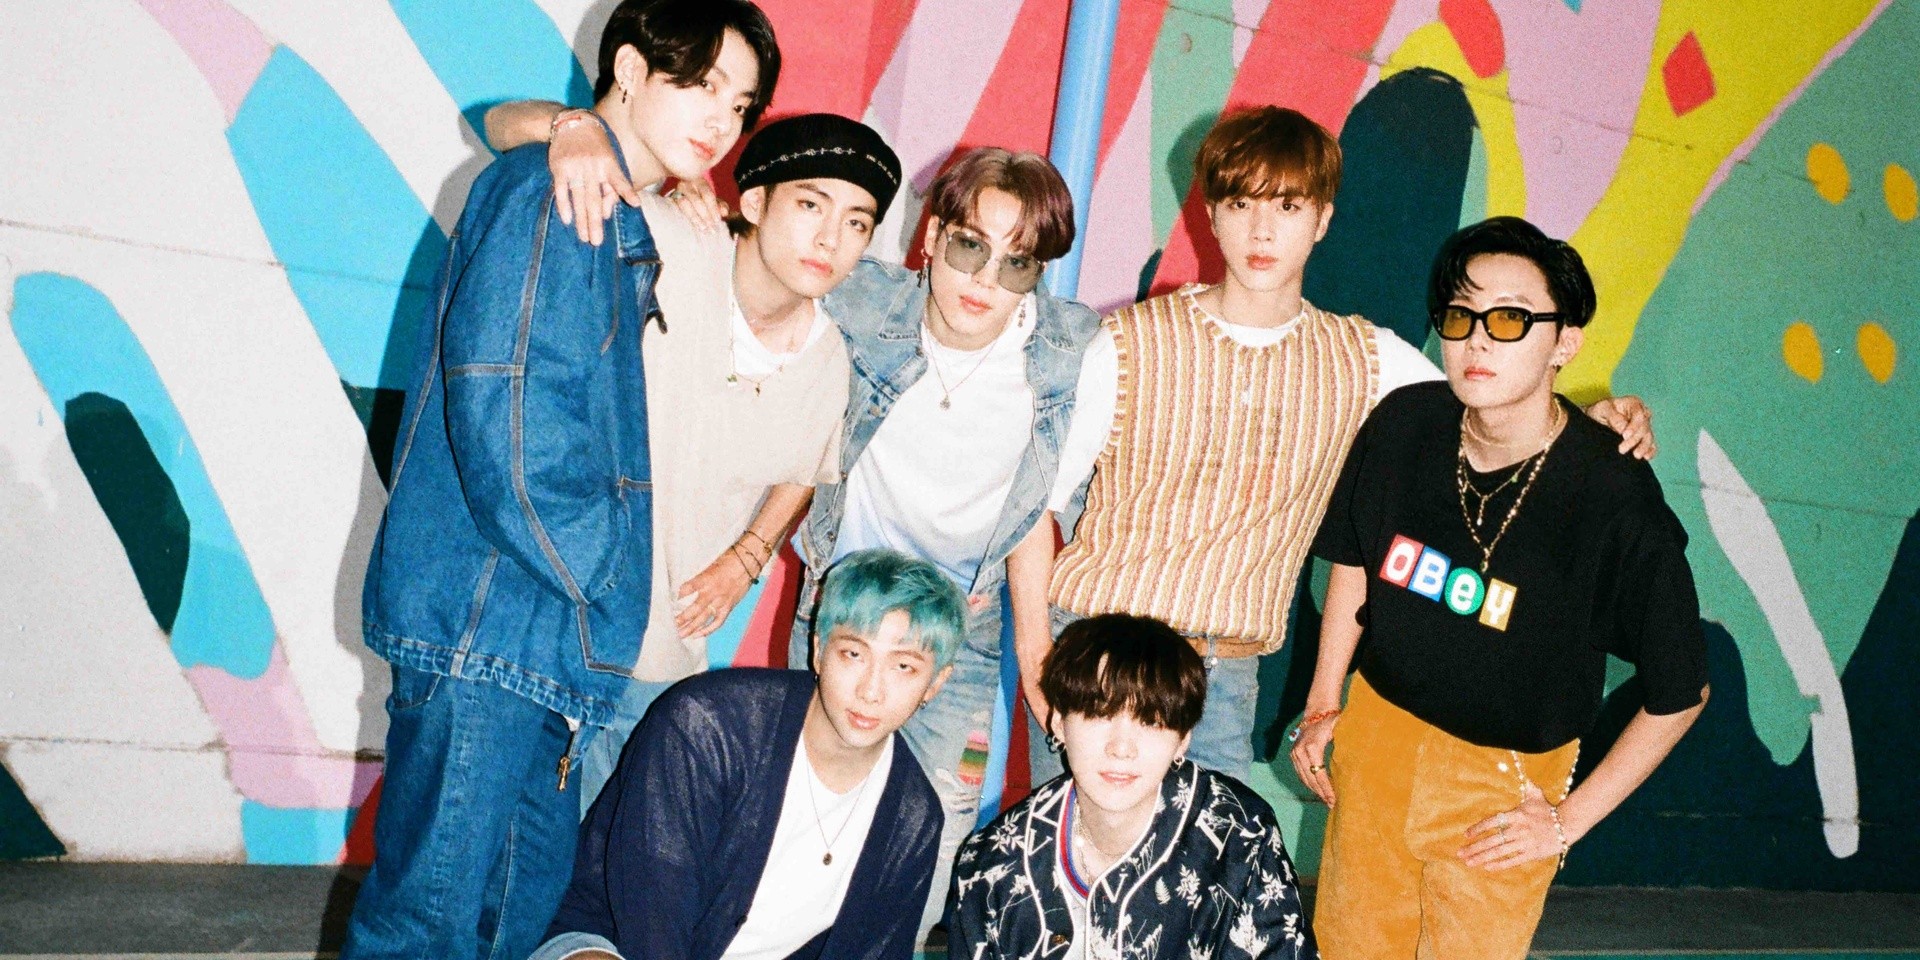 BTS' music video for 'Dynamite' joins 'DNA' and 'Boy with Luv' as it breaks 1 billion views